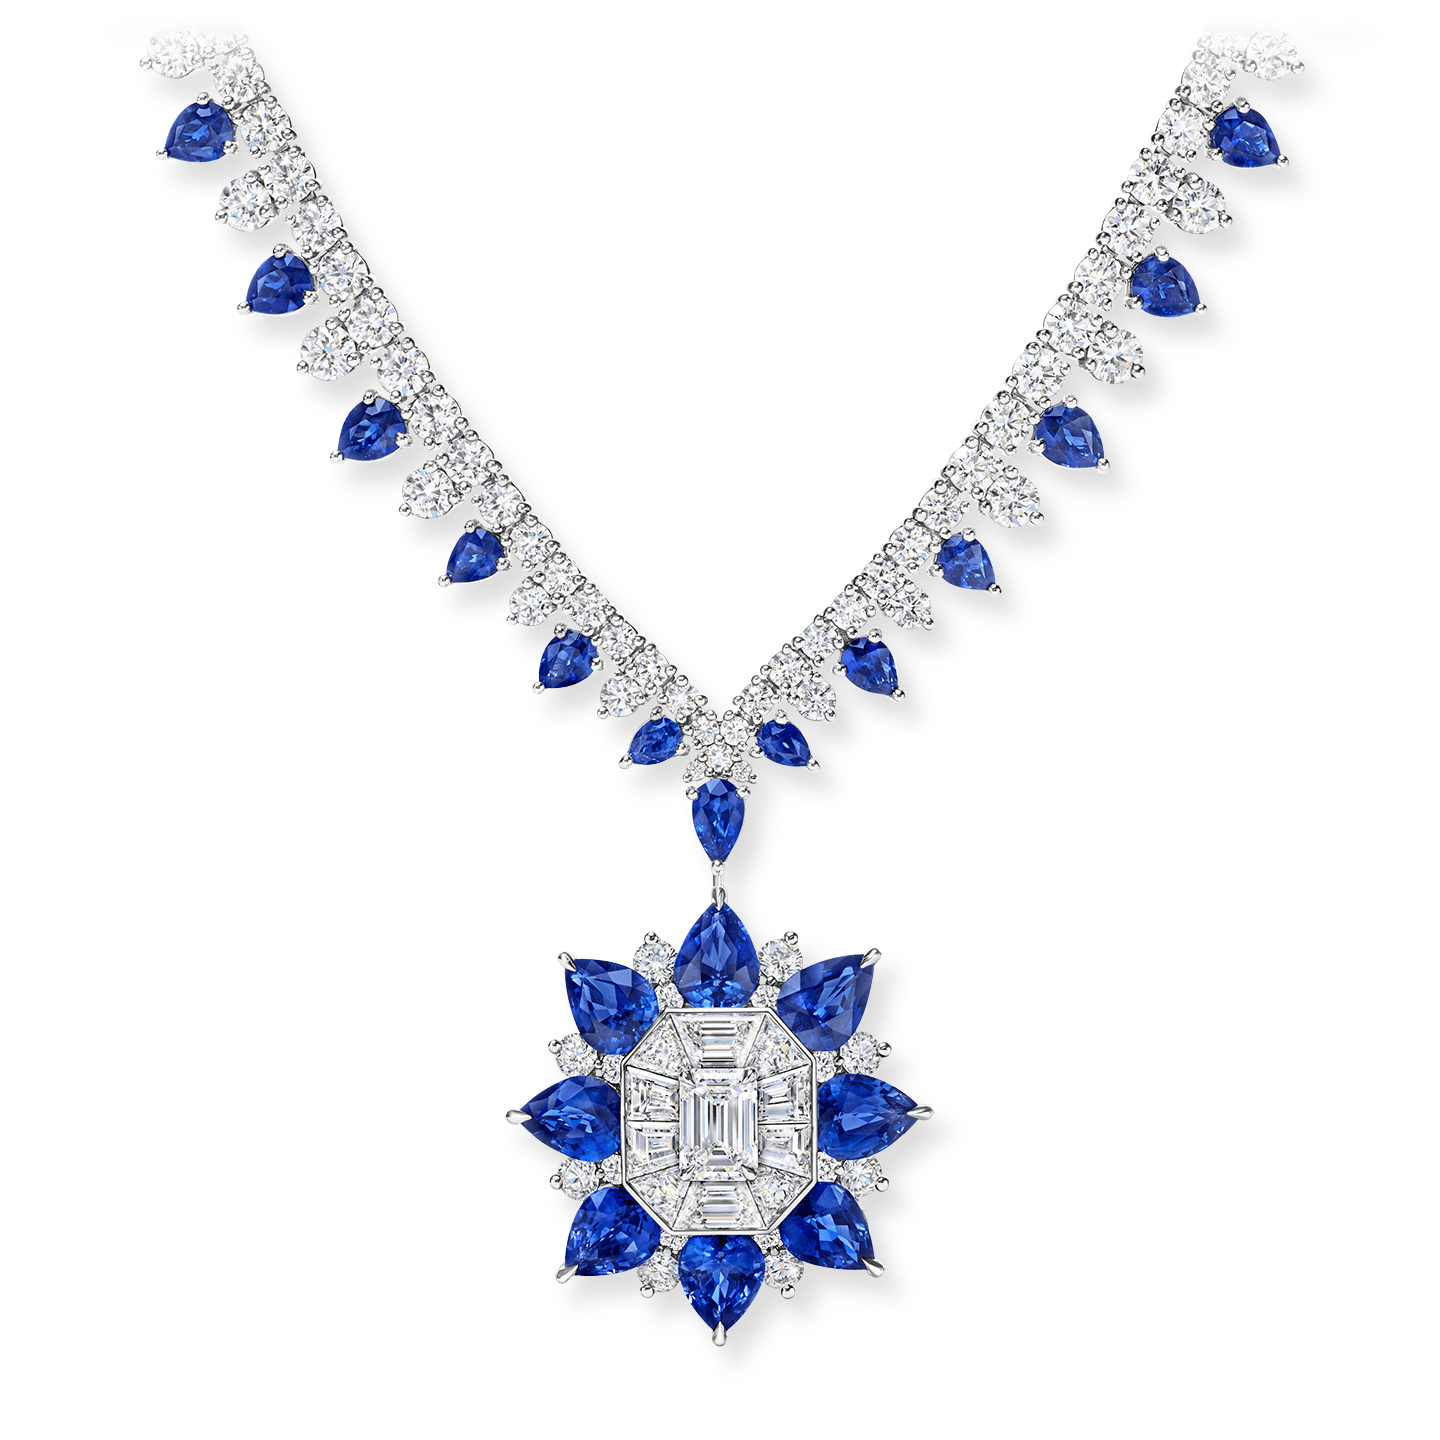 718 Marble Marquetry Necklace with Sapphires and Diamonds | Harry Winston